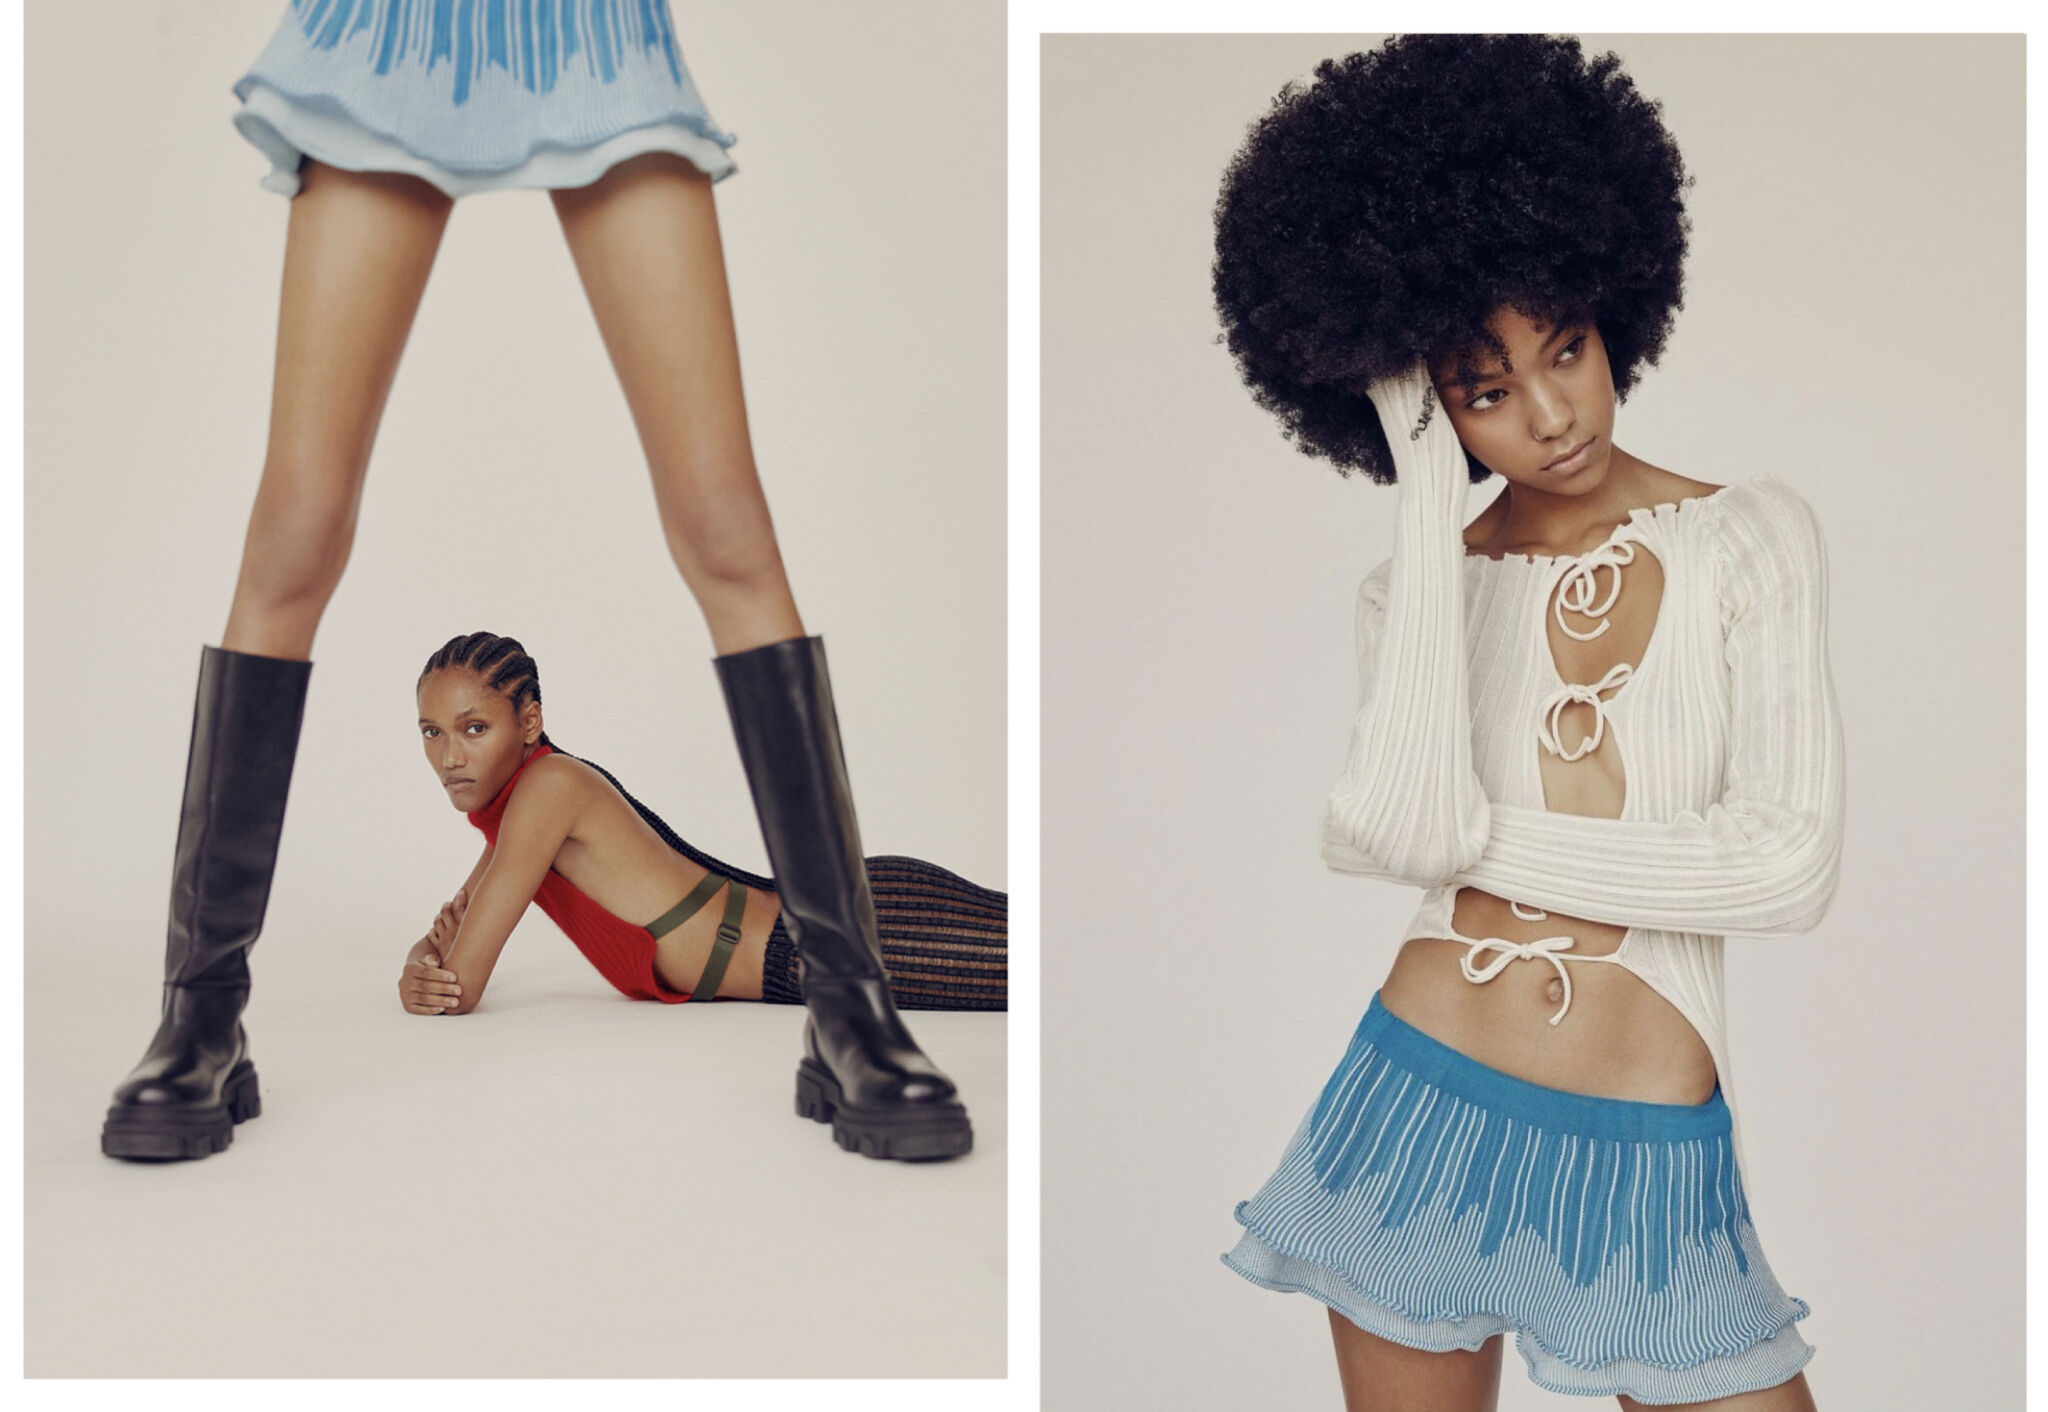 Nadia Wire featured in Contributor Magazine. Pictures by David Durbanke. Styled by Charmaine Lago.